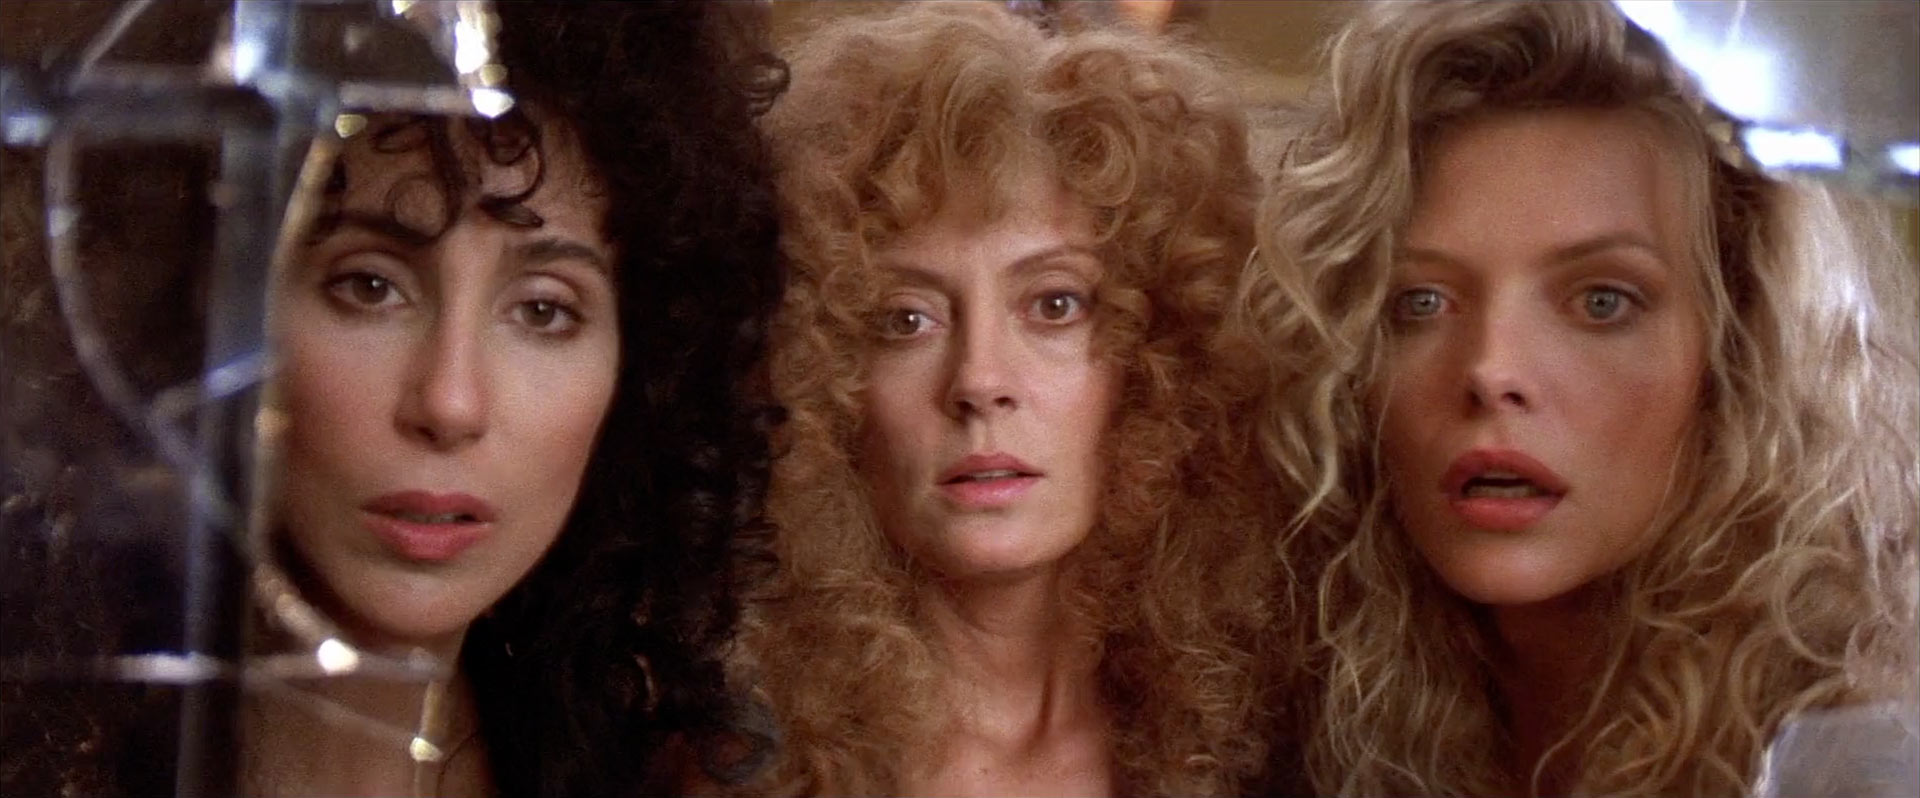 witches of eastwick movie review